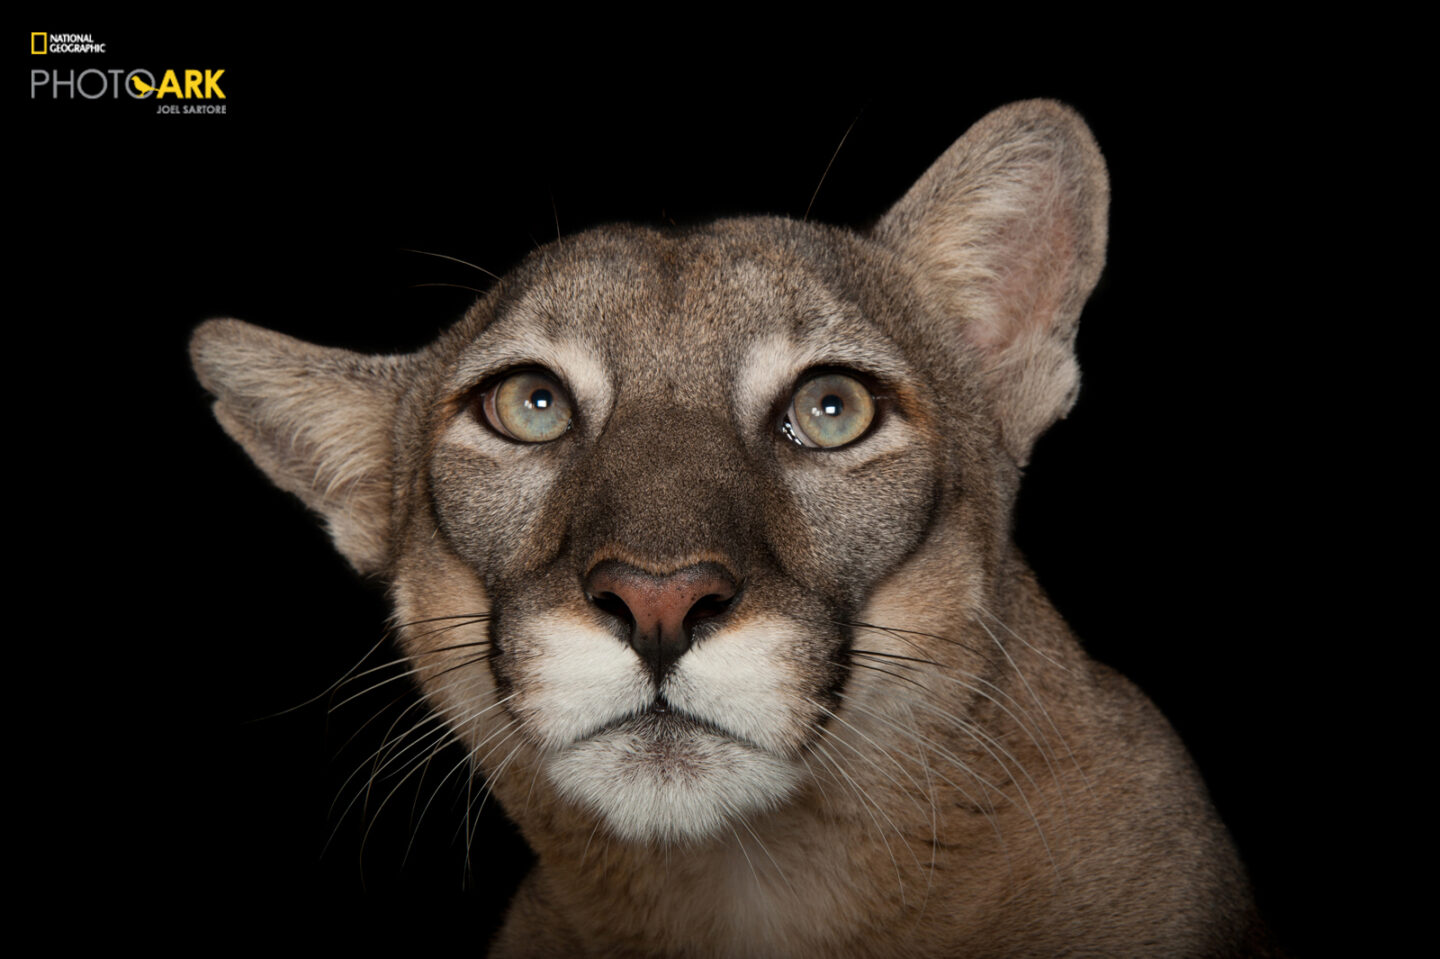 Portrait of Florida panther from Joel Sartore's Photo Ark project